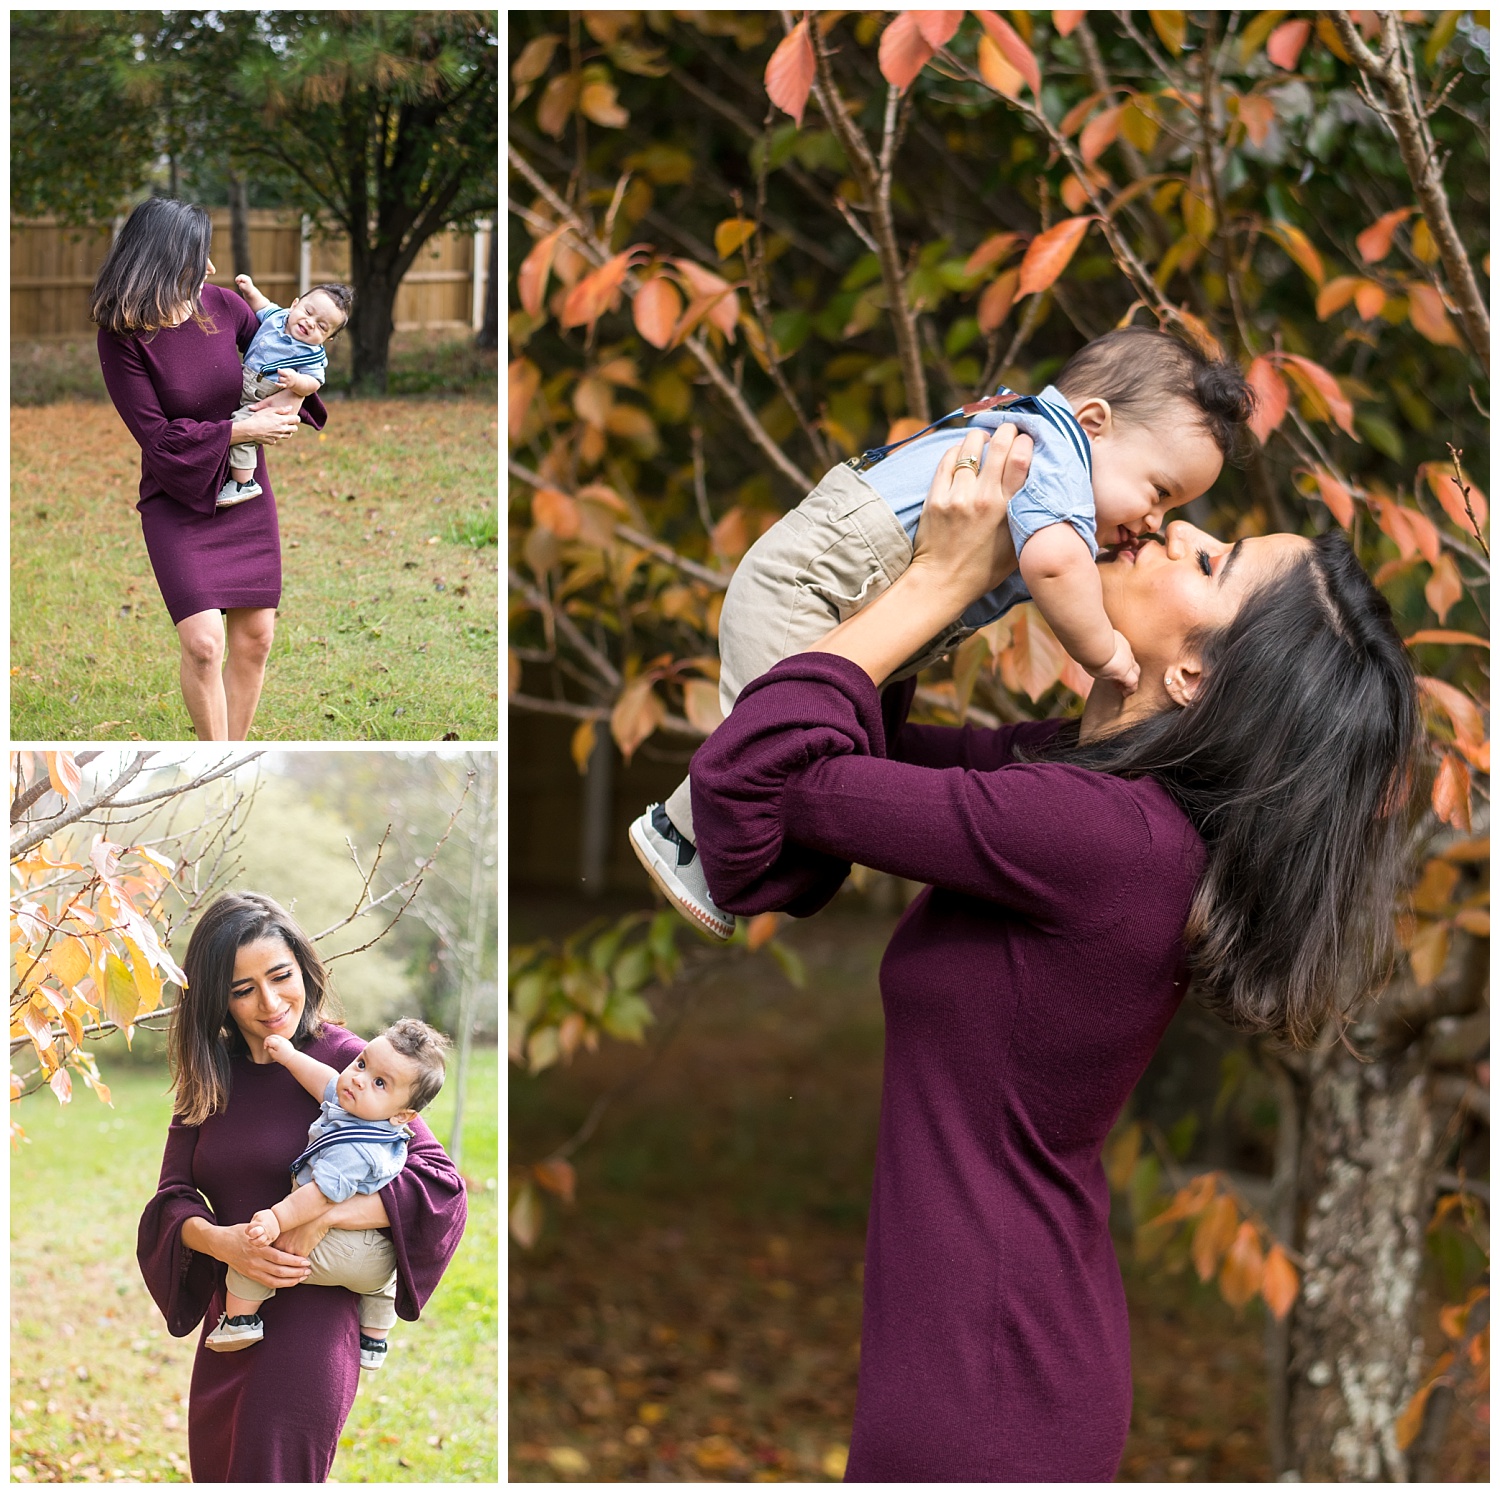 these are candid images of mom holding her baby boy outside and walking, looking at the trees, and kissing. these were taken during an in home lifestyle session in marietta, georgia.